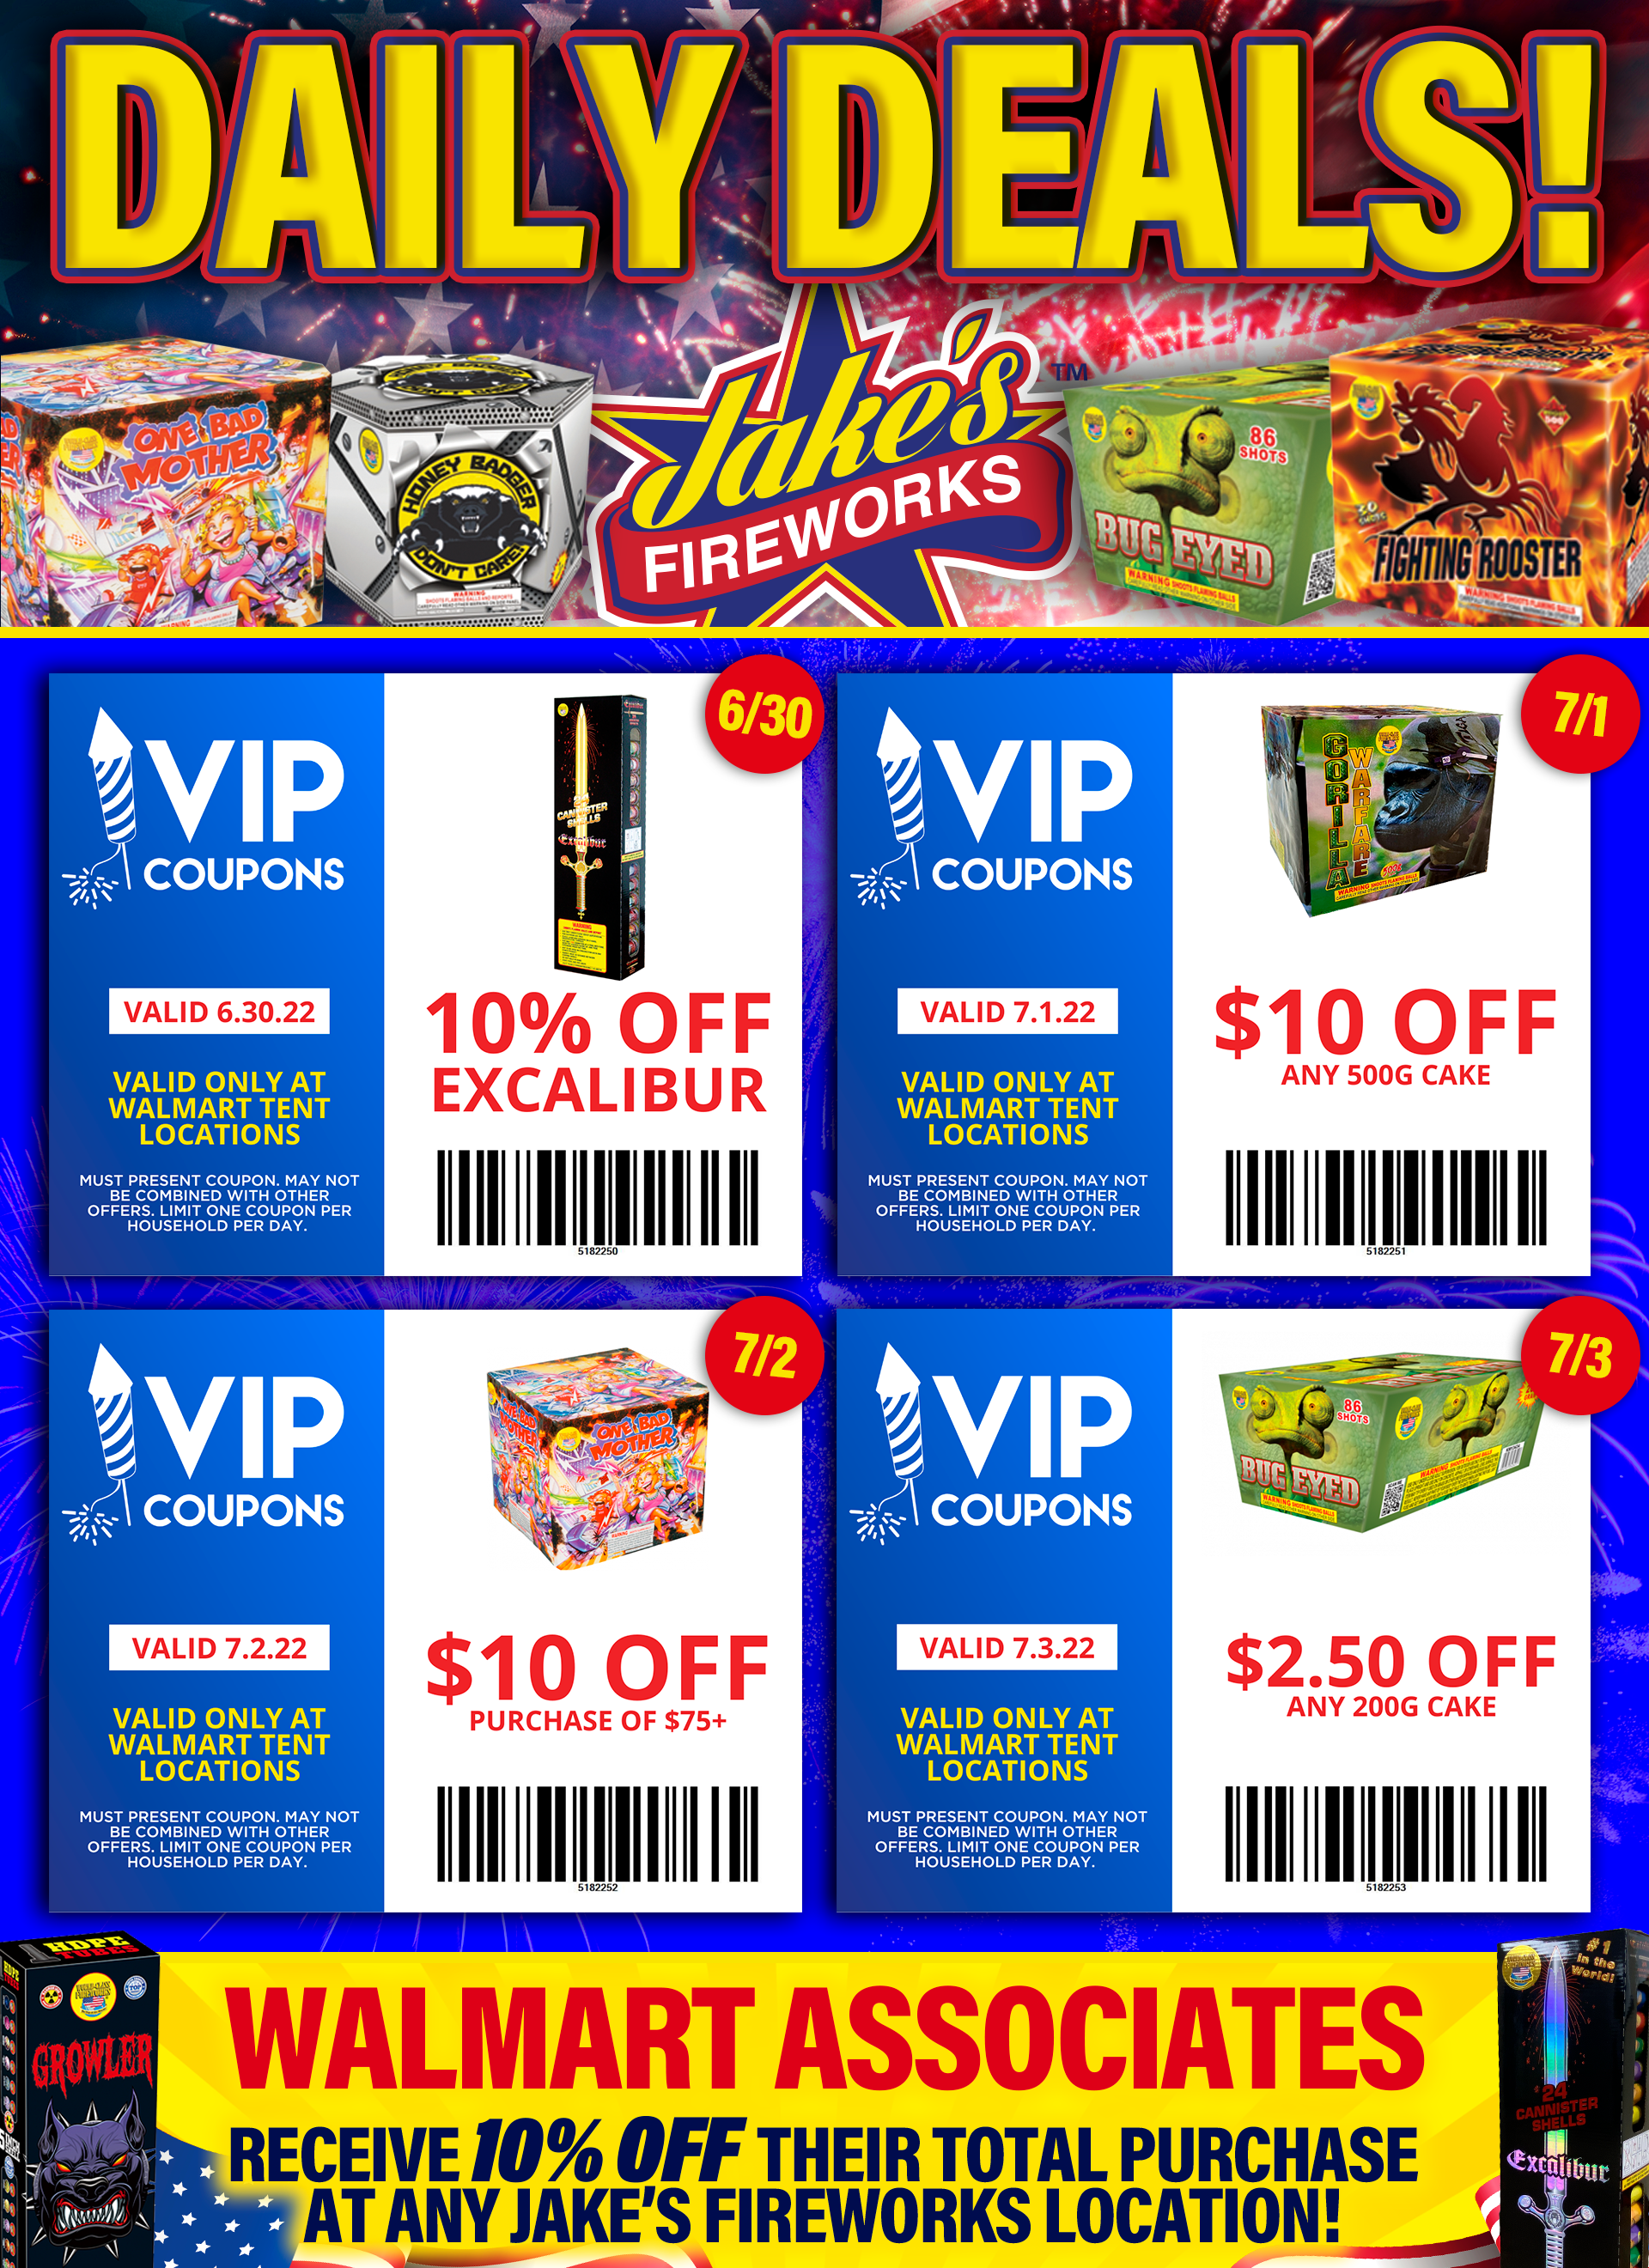 5 Fireworks Coupons!